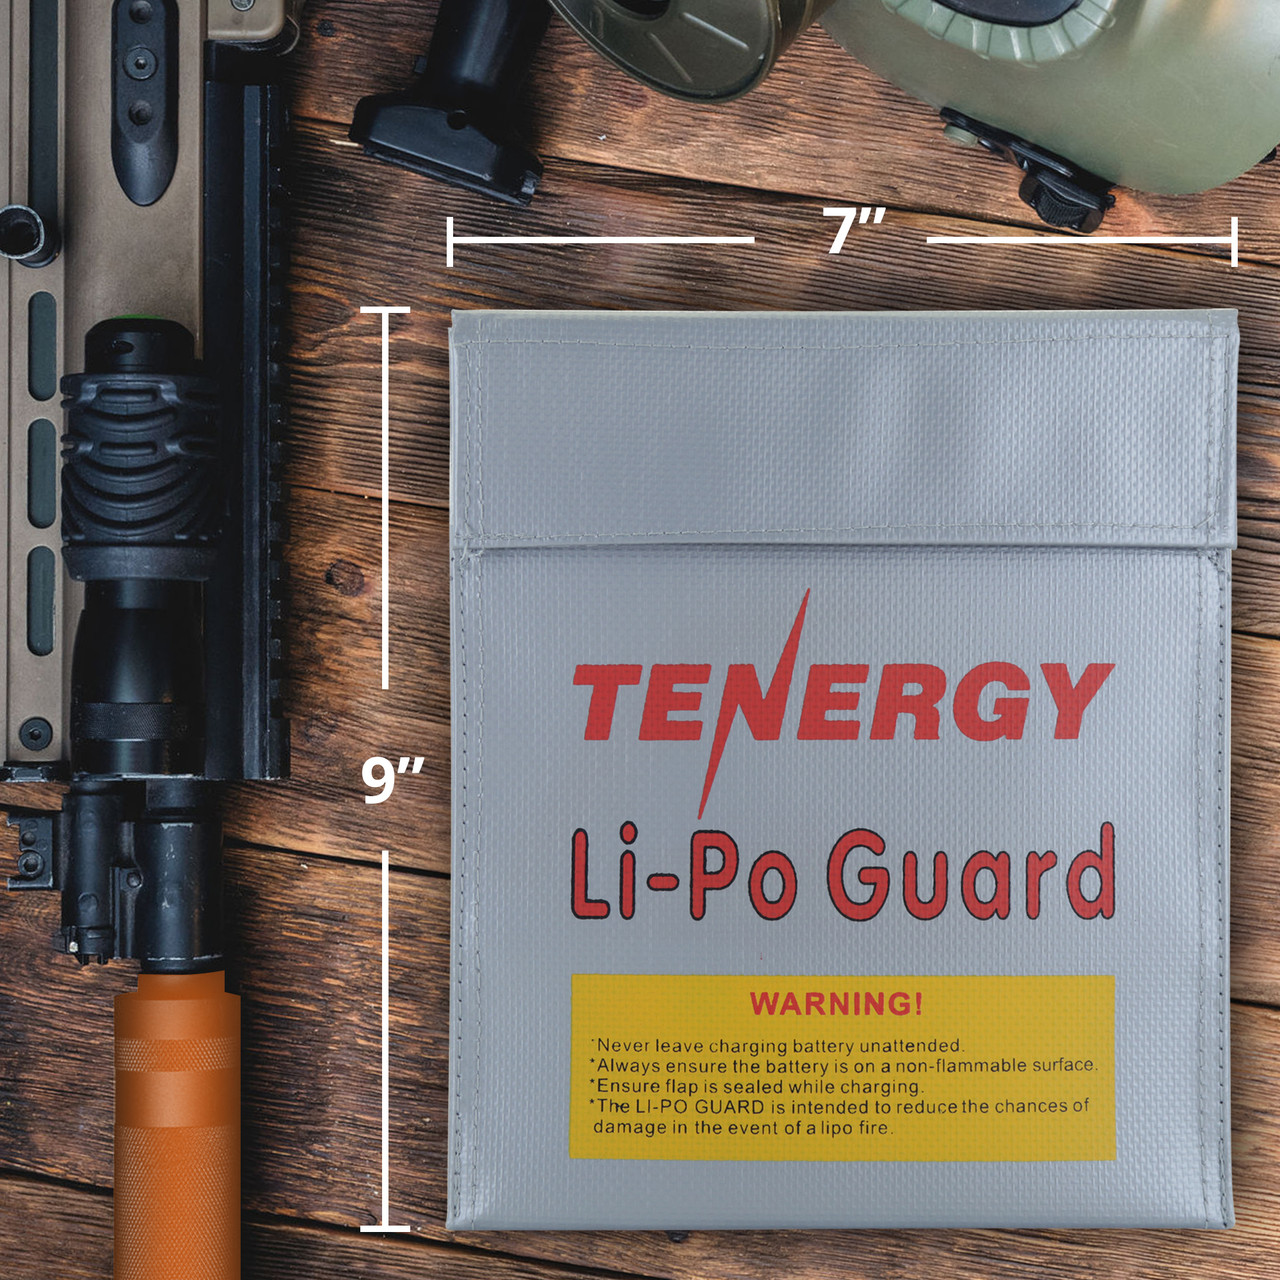 Tenergy 2-pk, Fire Retardant Lipo Battery Bag for Charging and Storage, 7x9inches each					